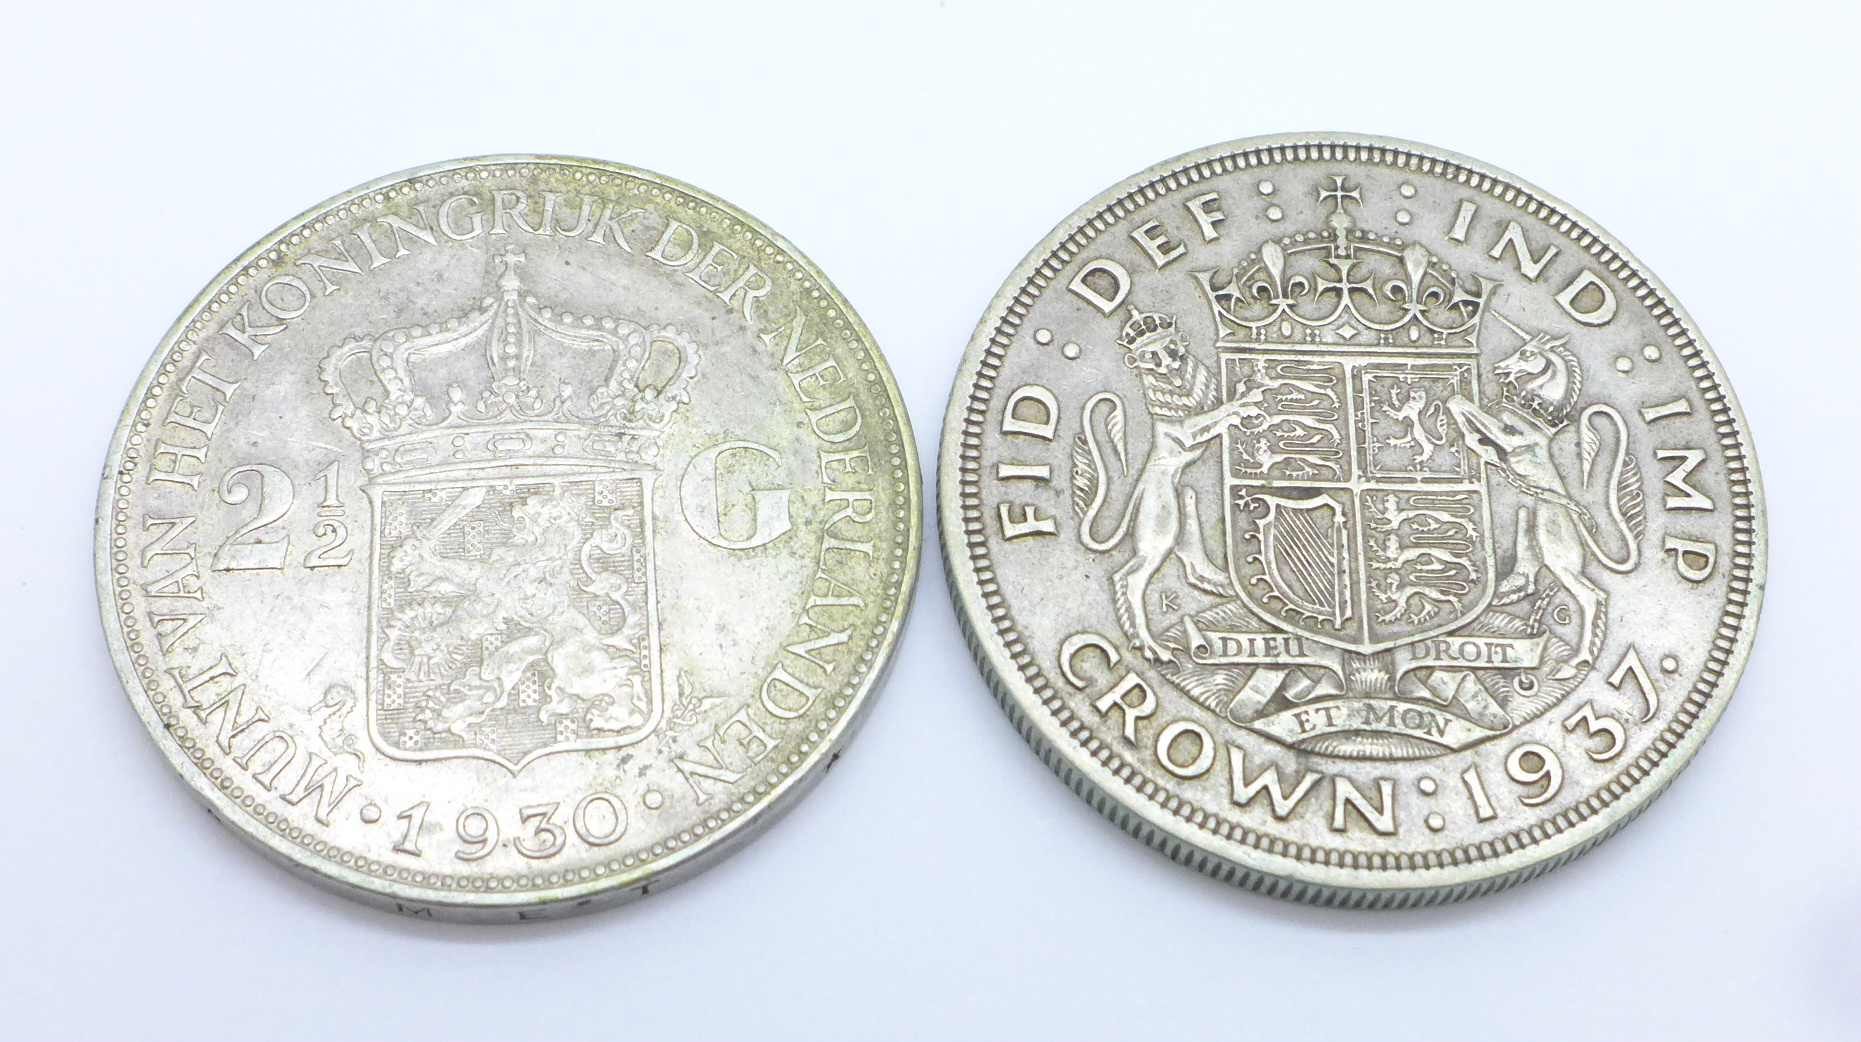 A 1937 George VI Coronation crown and Netherlands 1930 2½ guilder